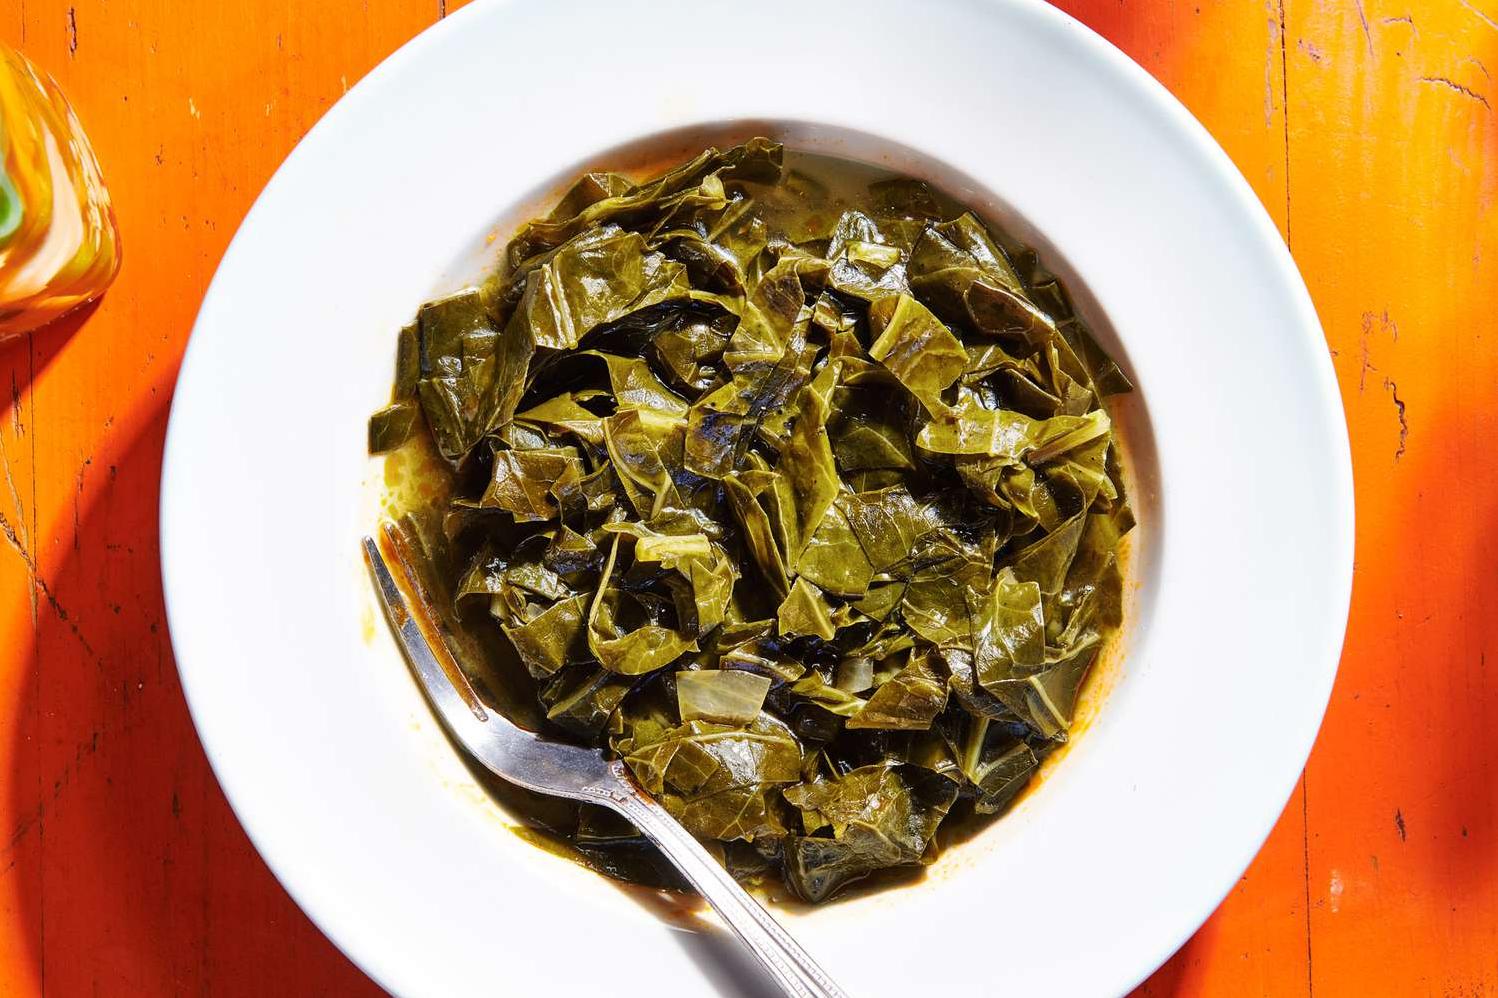  These collard greens are perfect as a side dish, but they can easily stand on their own as a main course.